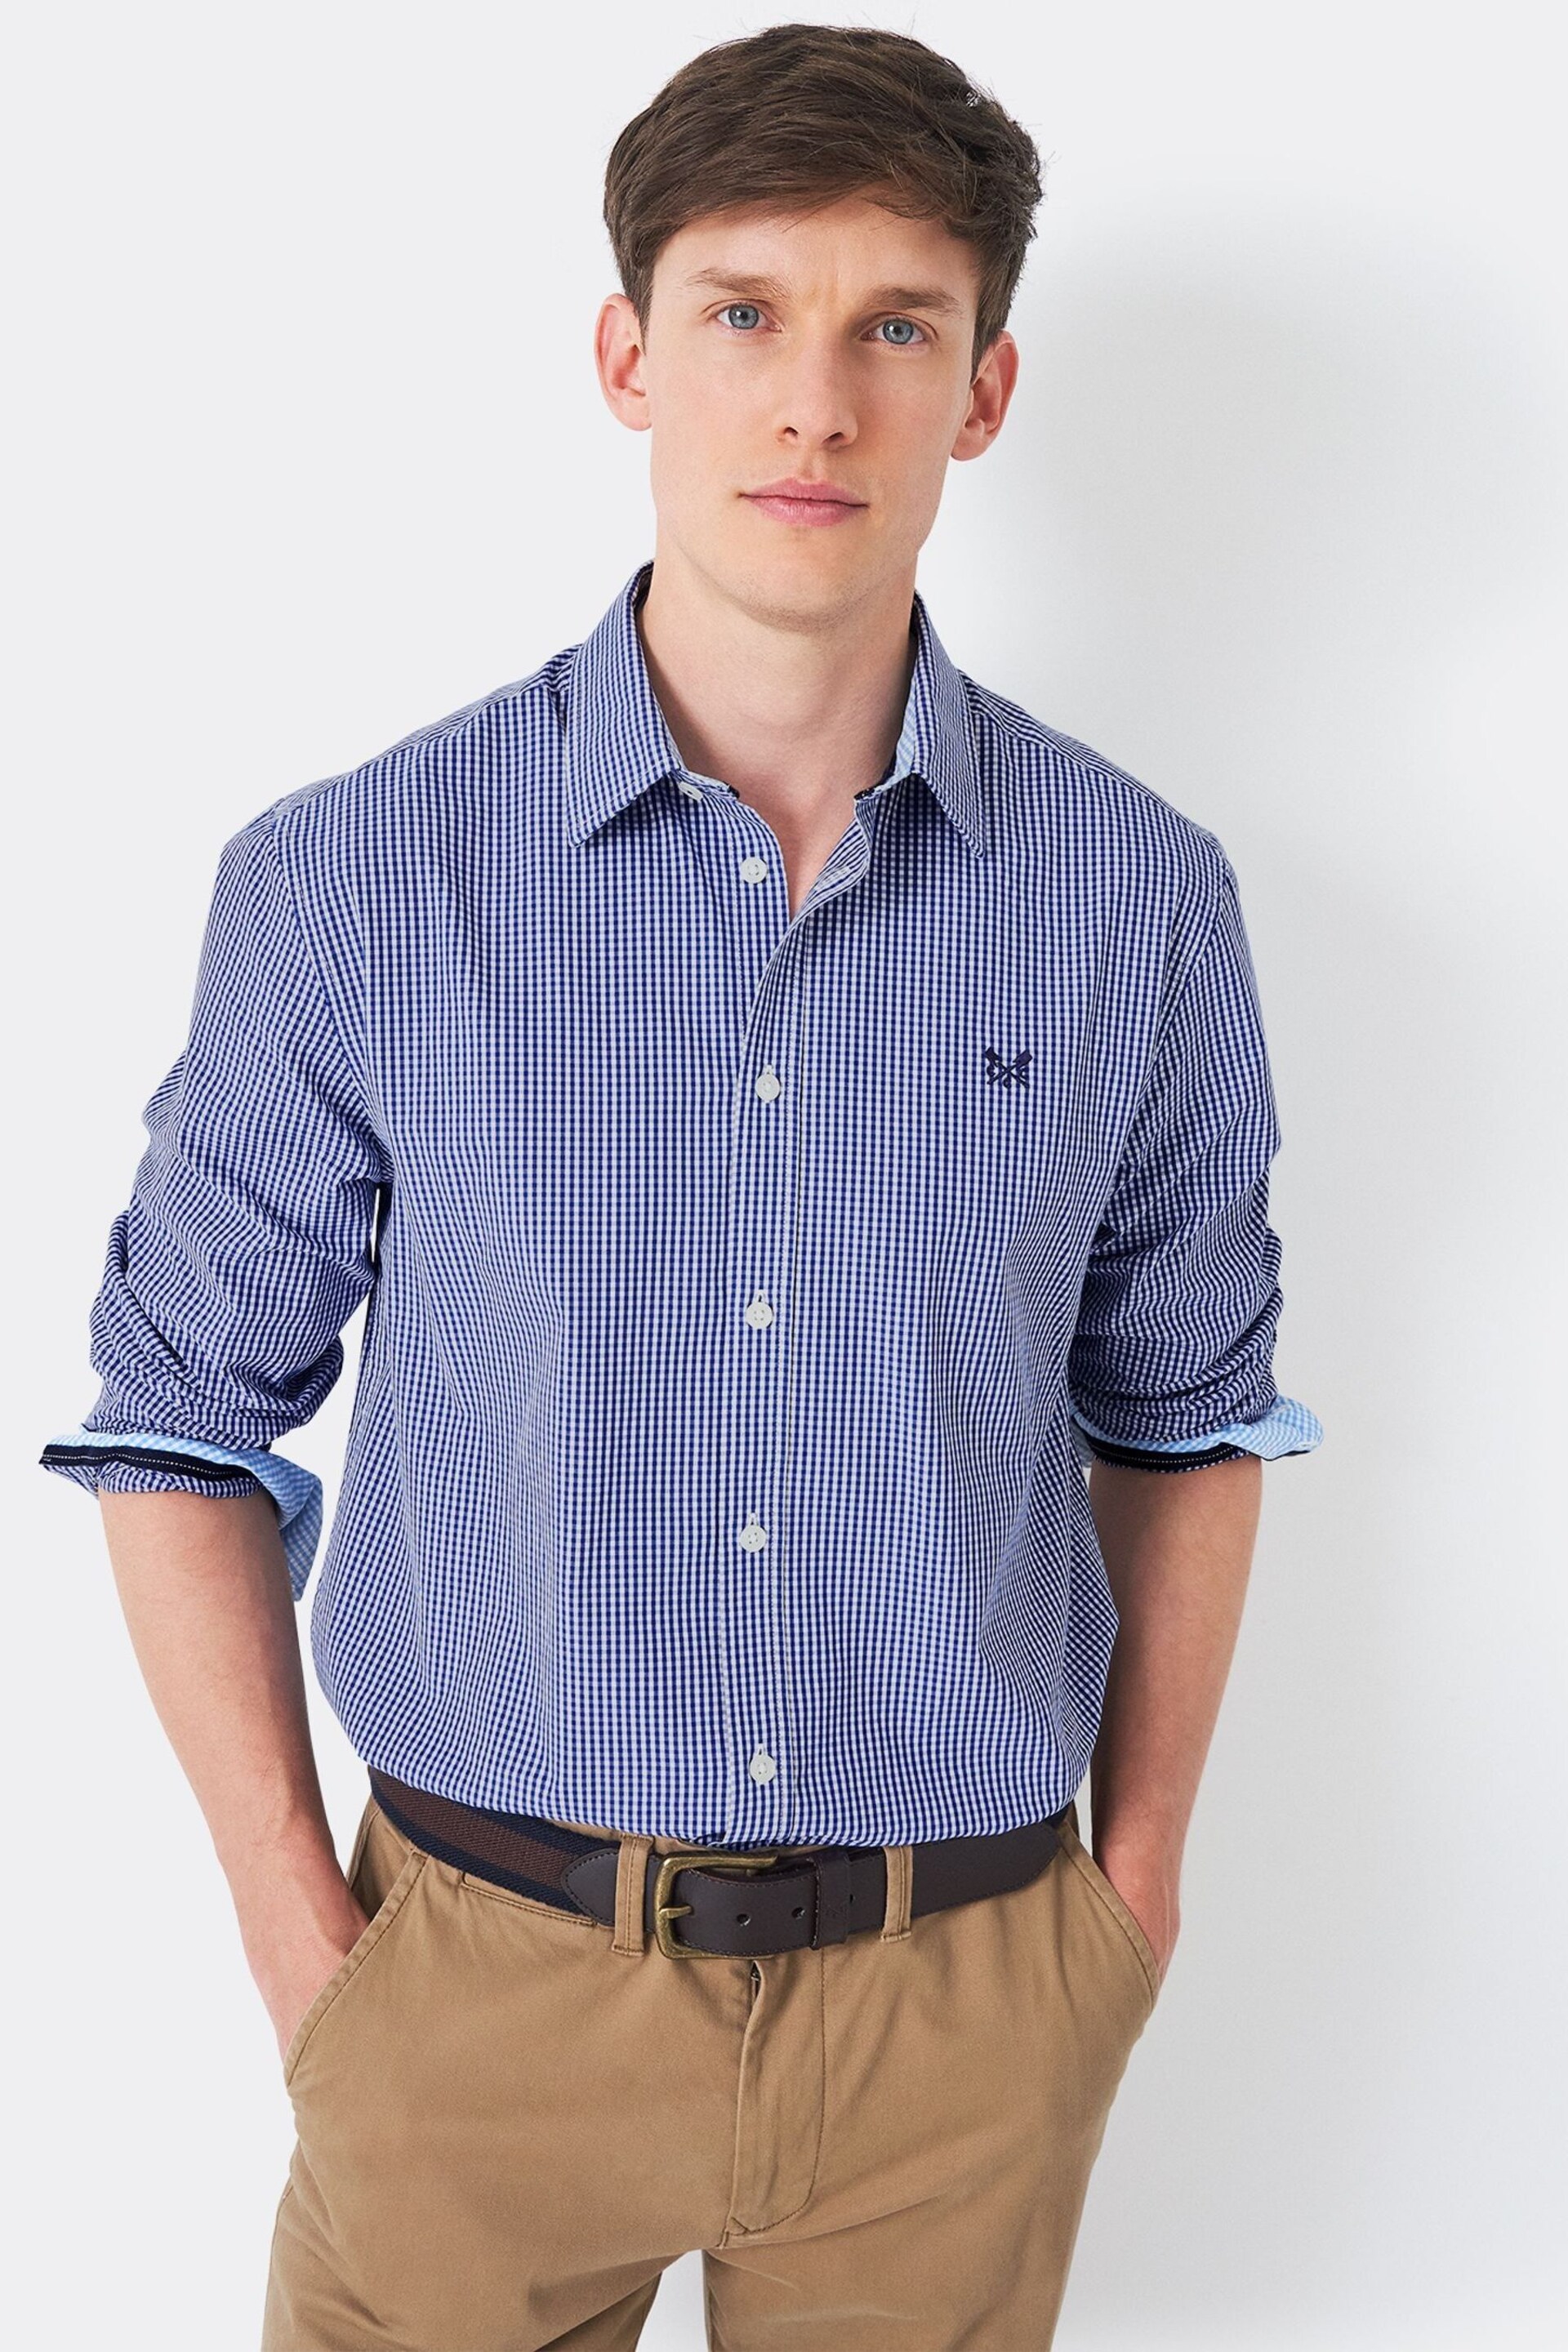 Crew Clothing Classic Fit Micro Gingham Shirt - Image 1 of 4